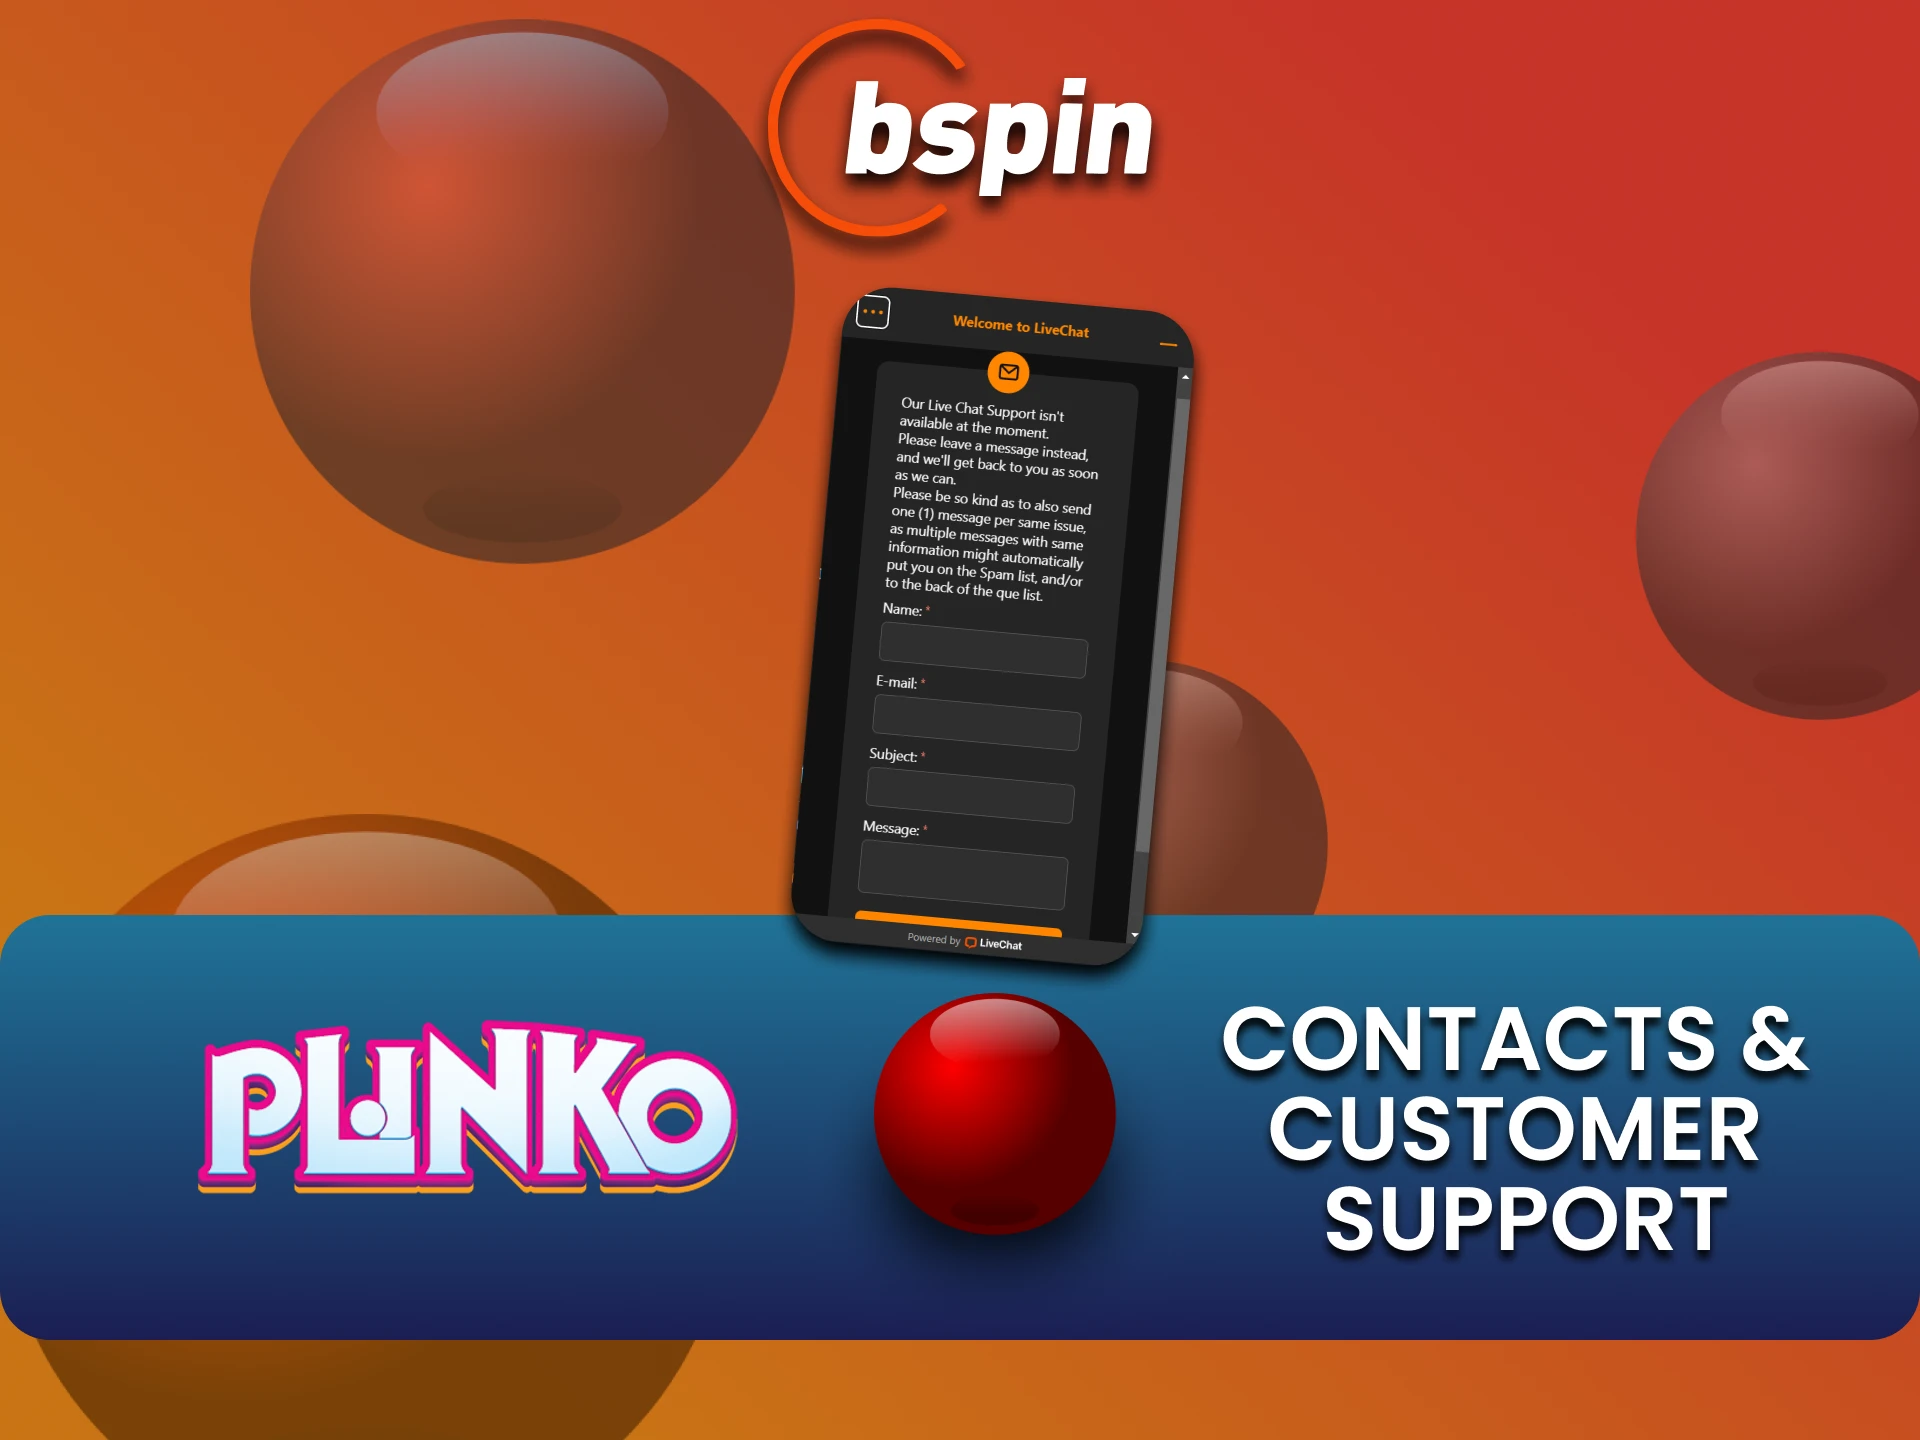 Choose your way to contact the Bspin team regarding Plinko questions.